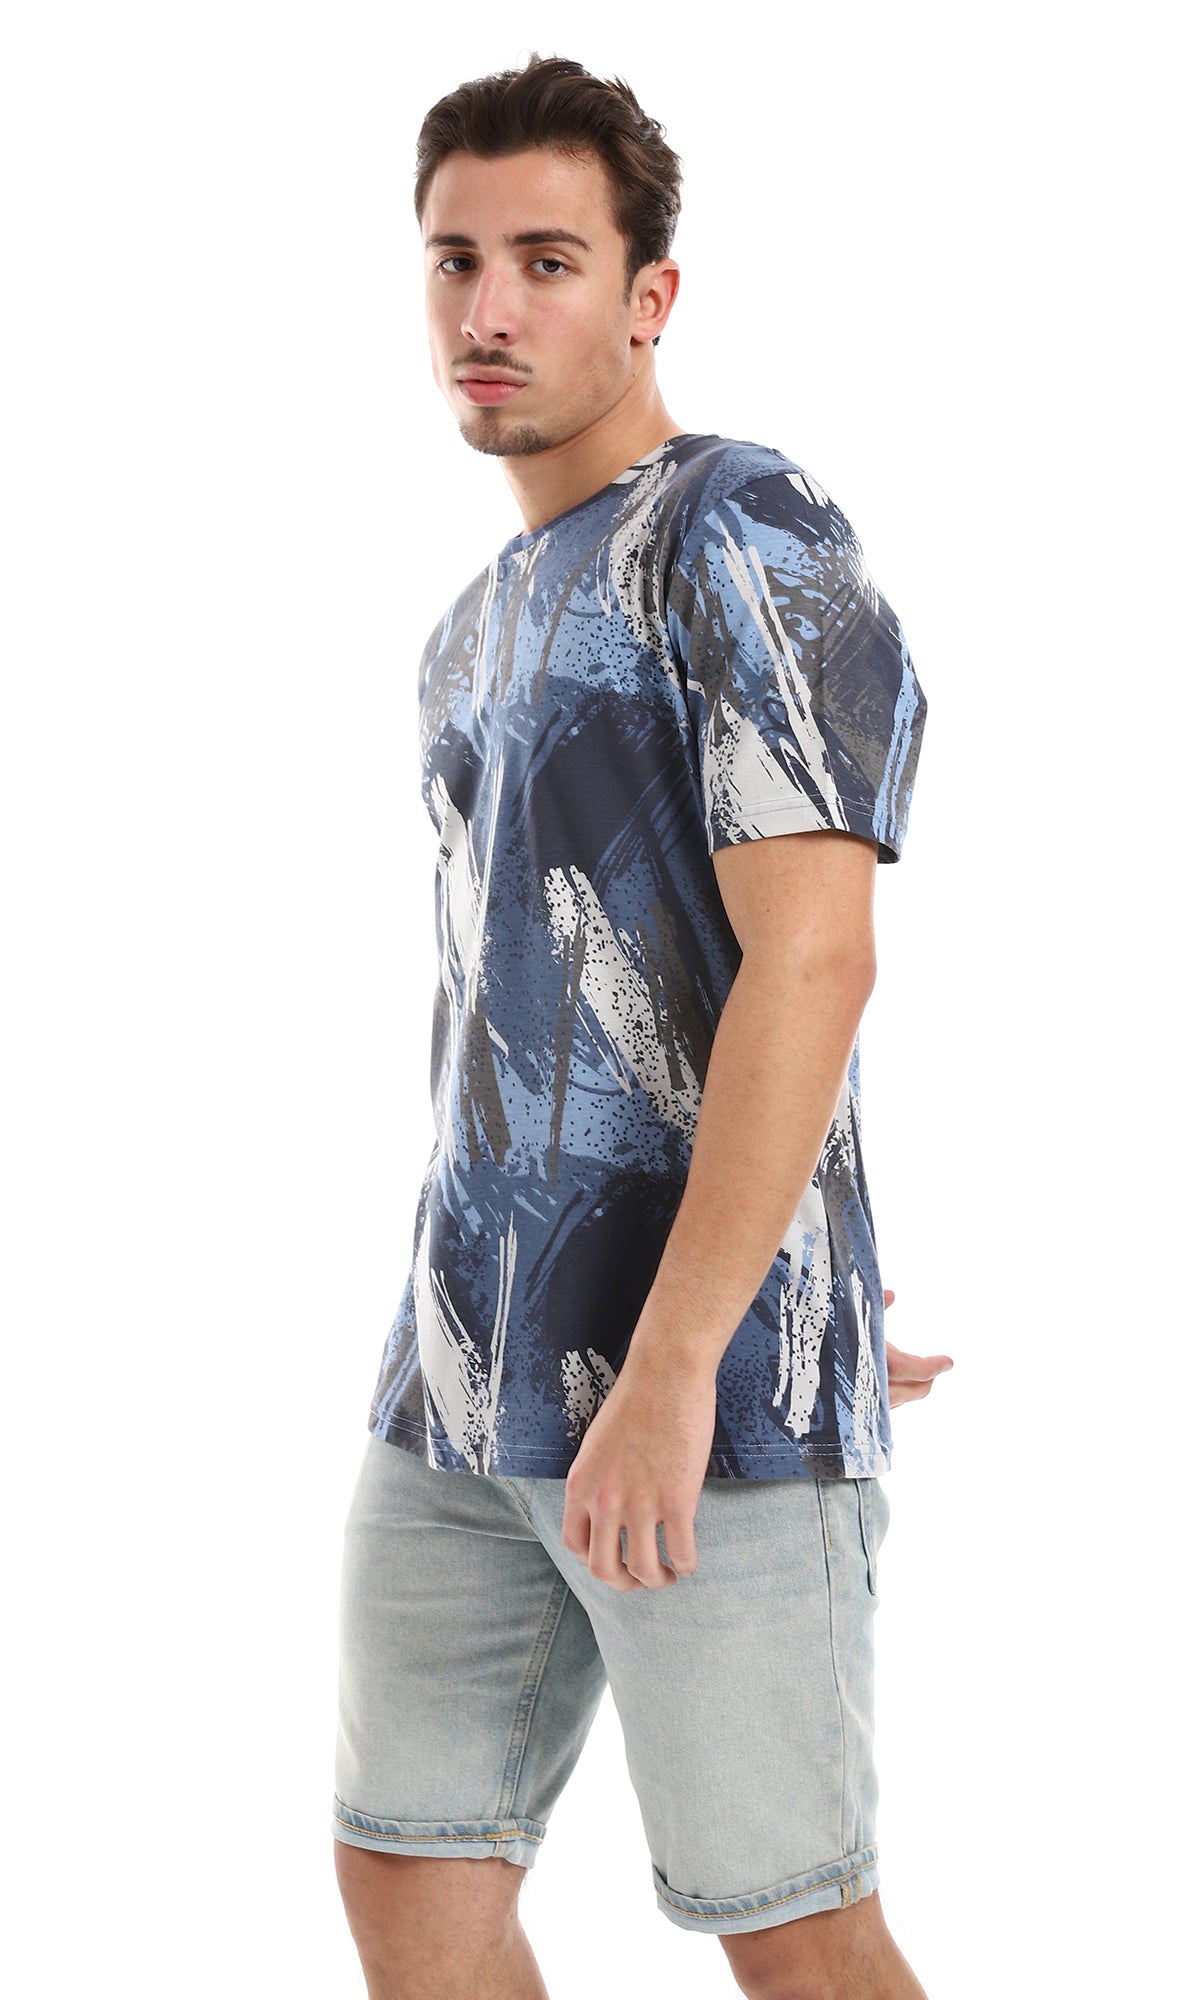 O164739 Self Patterned Cotton Tee - Brown & Blue Shades